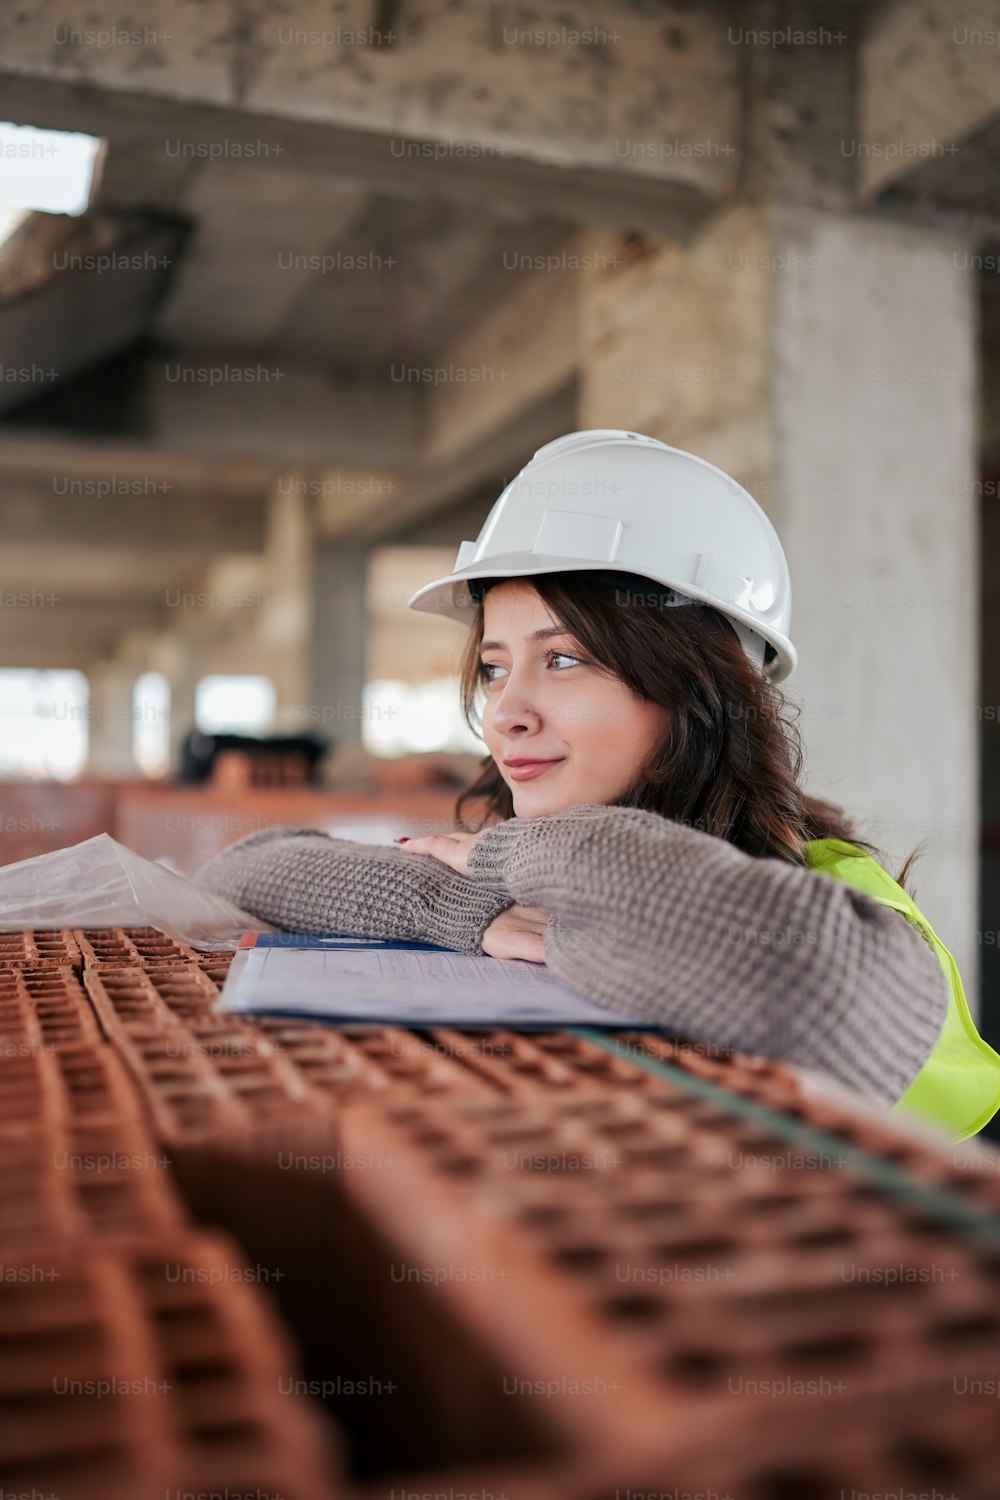 a woman wearing a hard hat and gloves